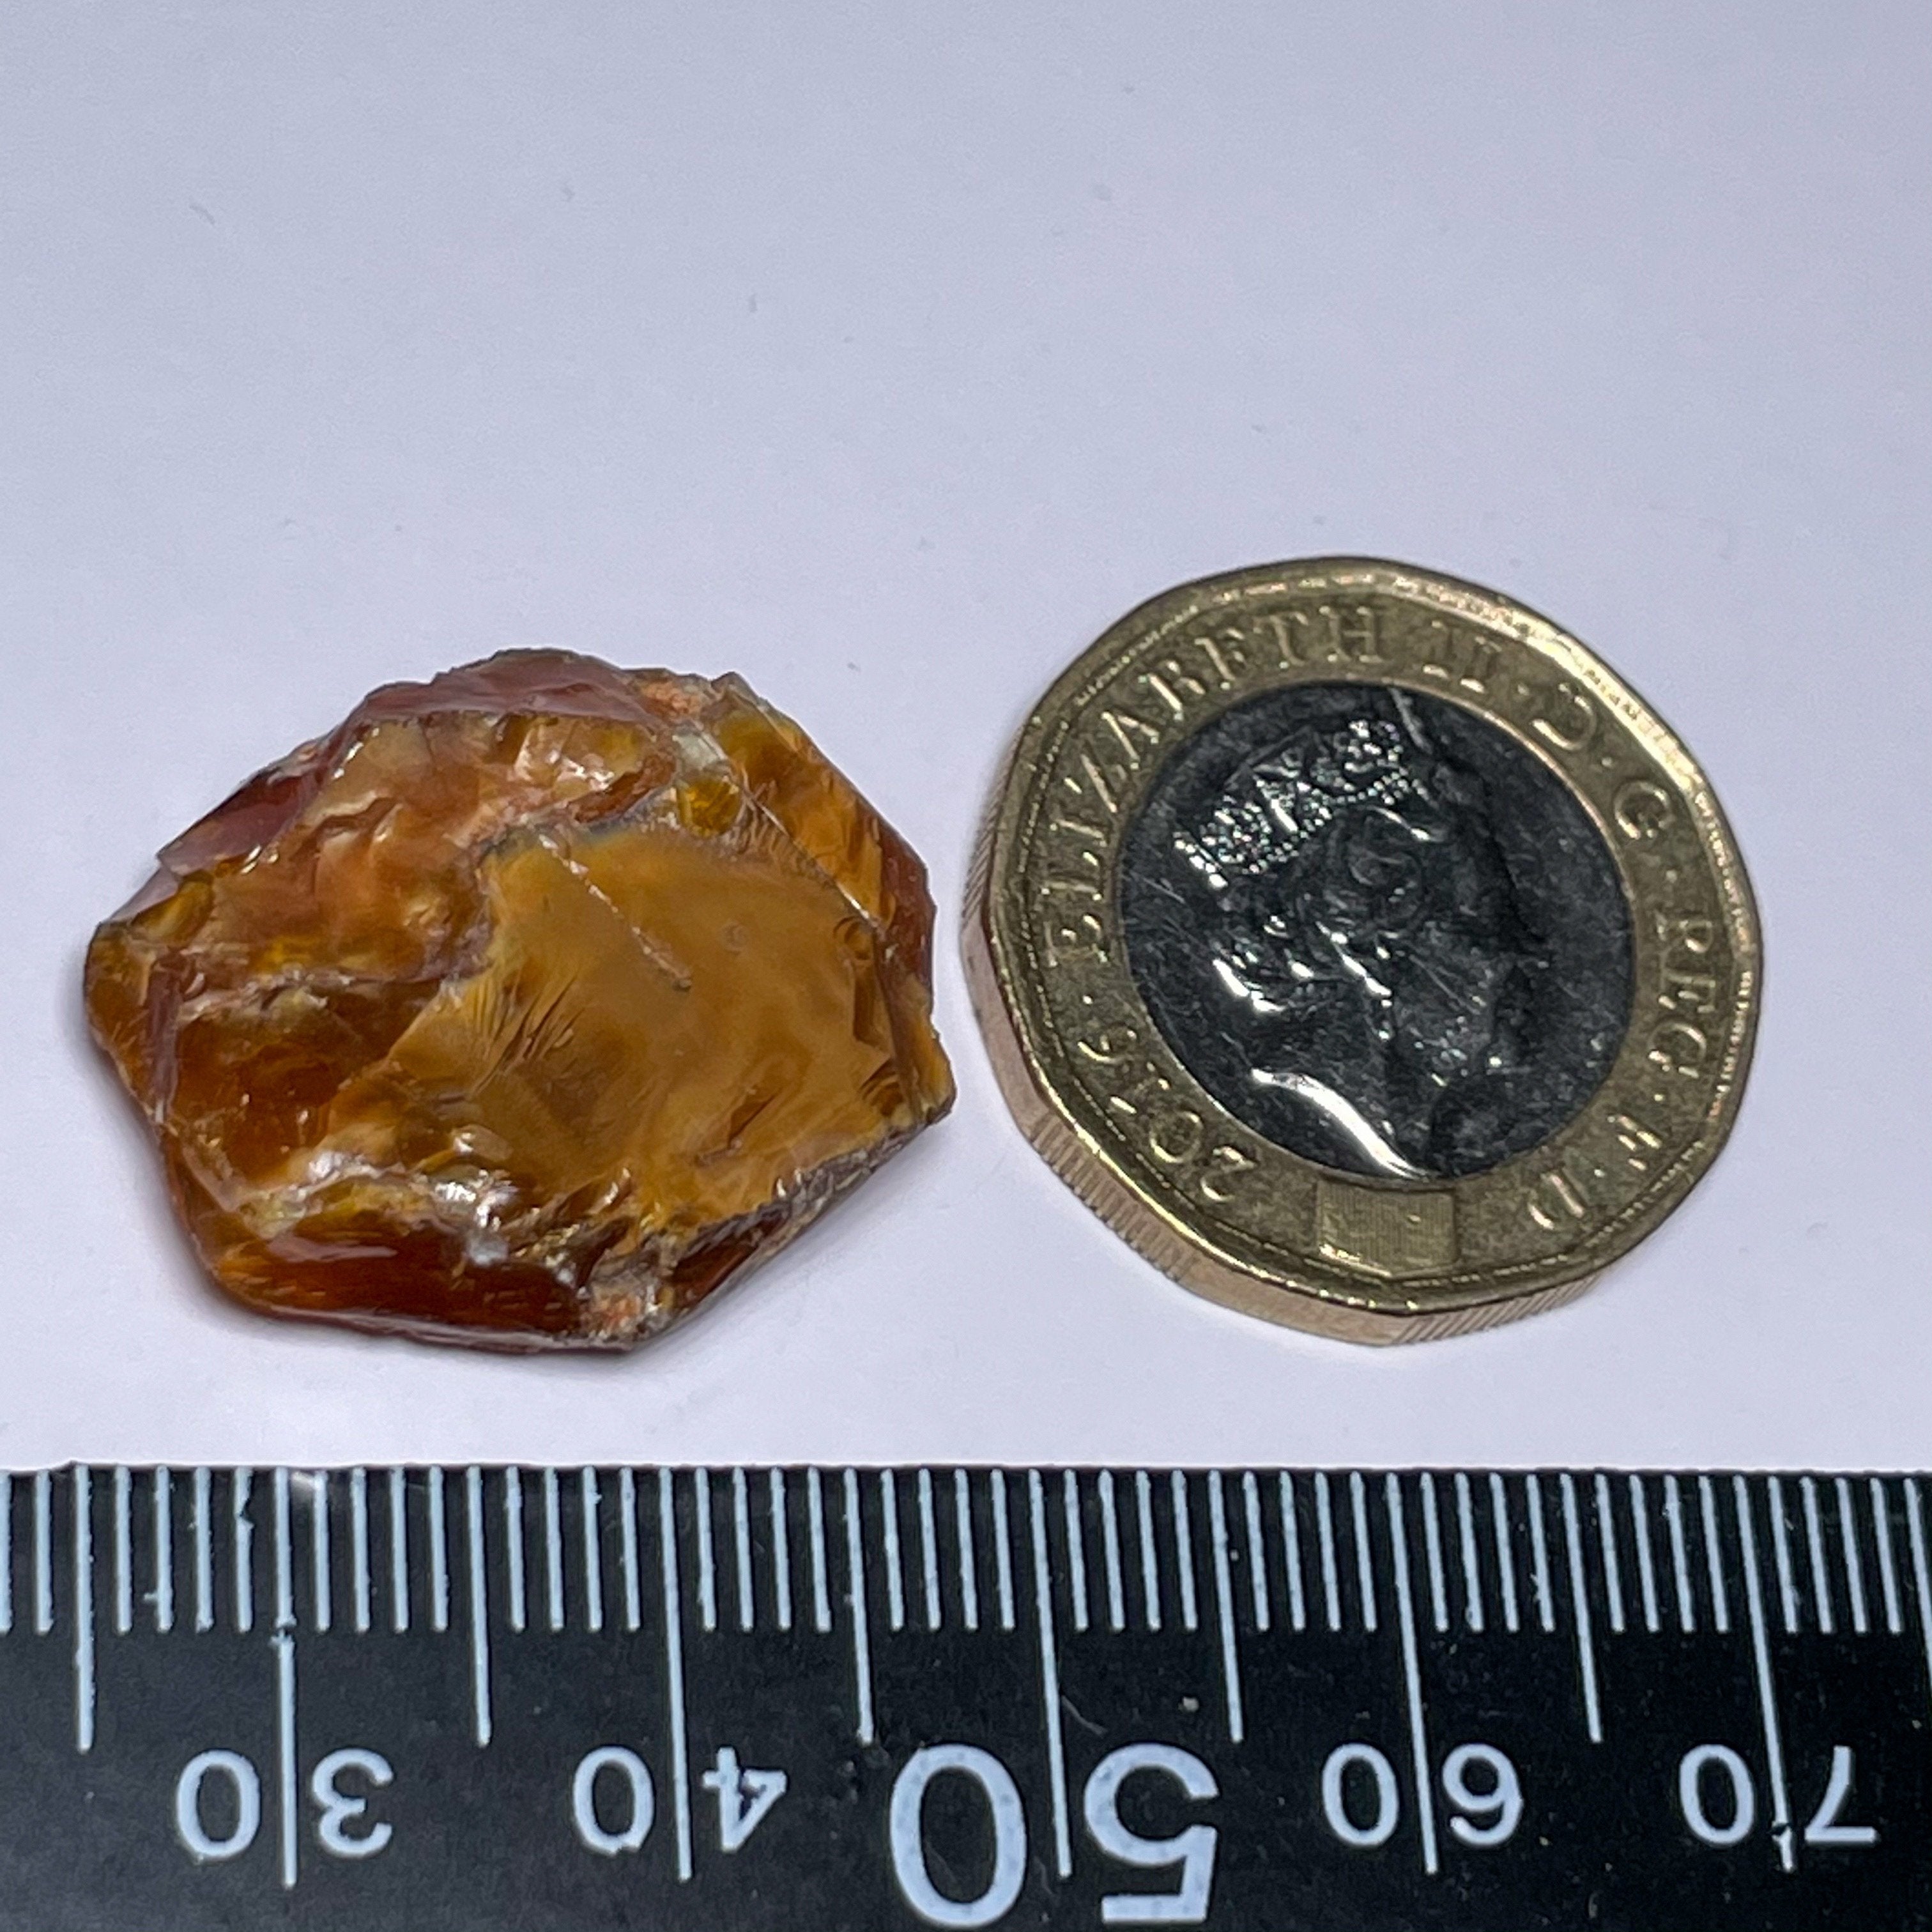 19.34Ct Opal Tanzania Untreated Unheated From A 1999 Deposit Chatoyant (Cats-Eye Effect) Has An